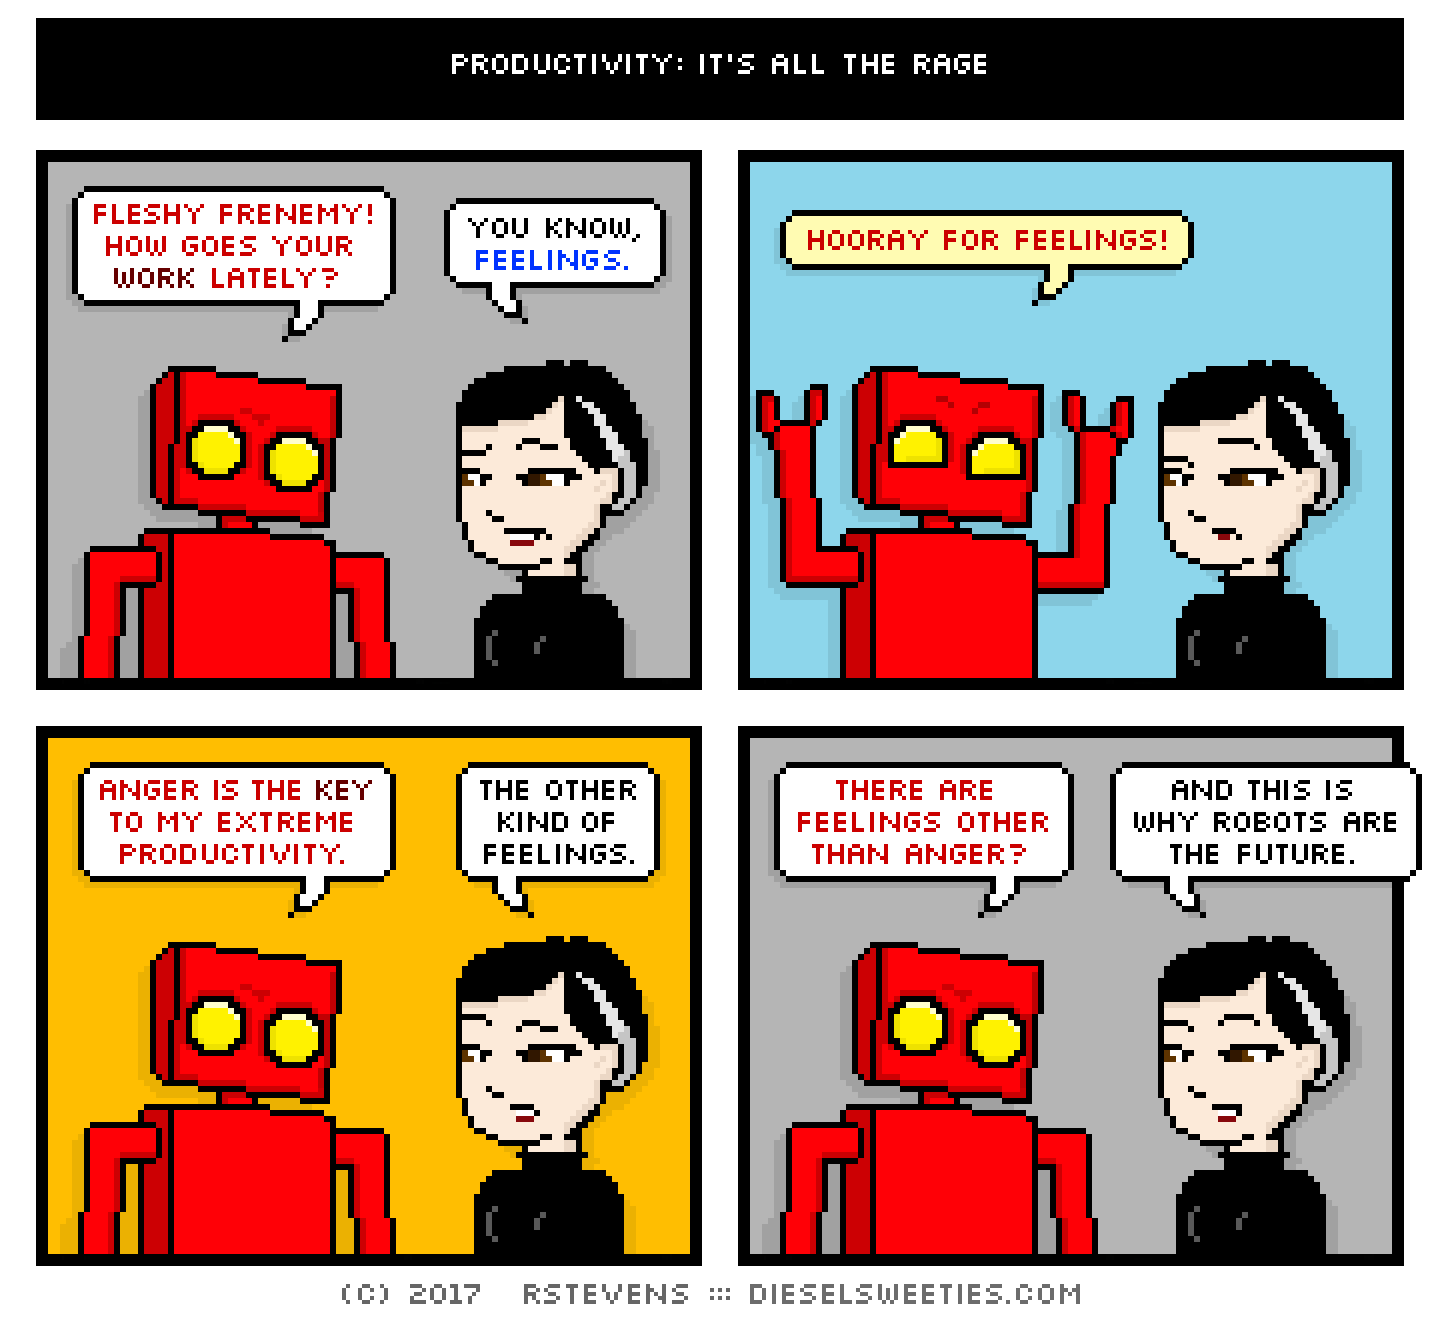 red robot, pale suzie : arms up, fleshy frenemy! how goes your work lately? you know, feelings. hooray for feelings! anger is the key to my extreme productivity. the other kind of feelings. there are feelings other than anger? and this is why robots are the future.